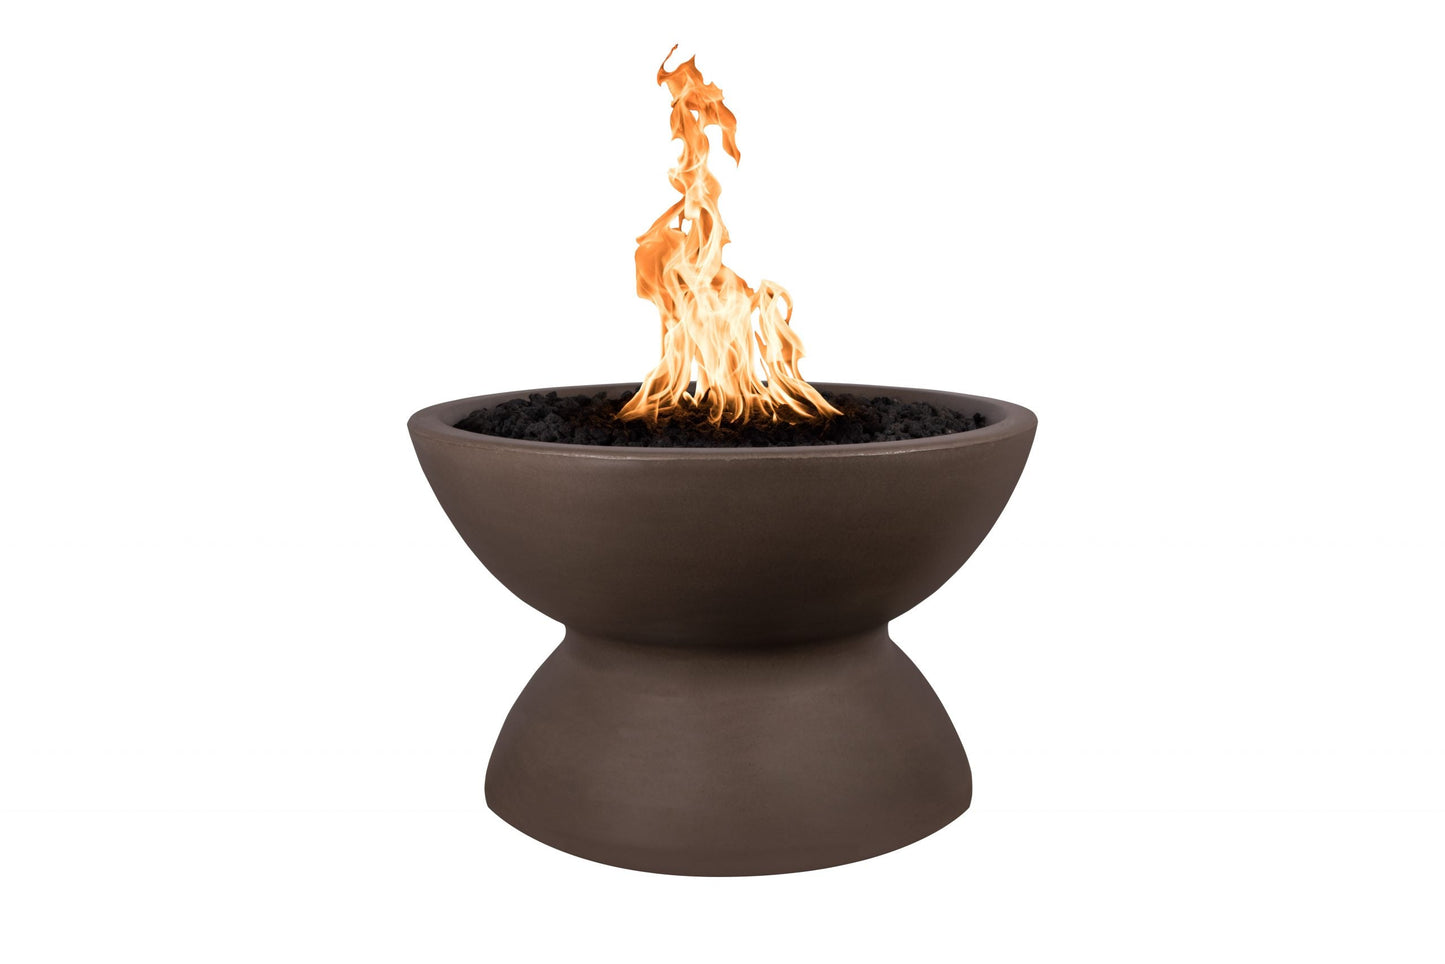 The Outdoor Plus Round Copa 33" Rustic White GFRC Concrete Natural Gas Fire Pit with Match Lit Ignition